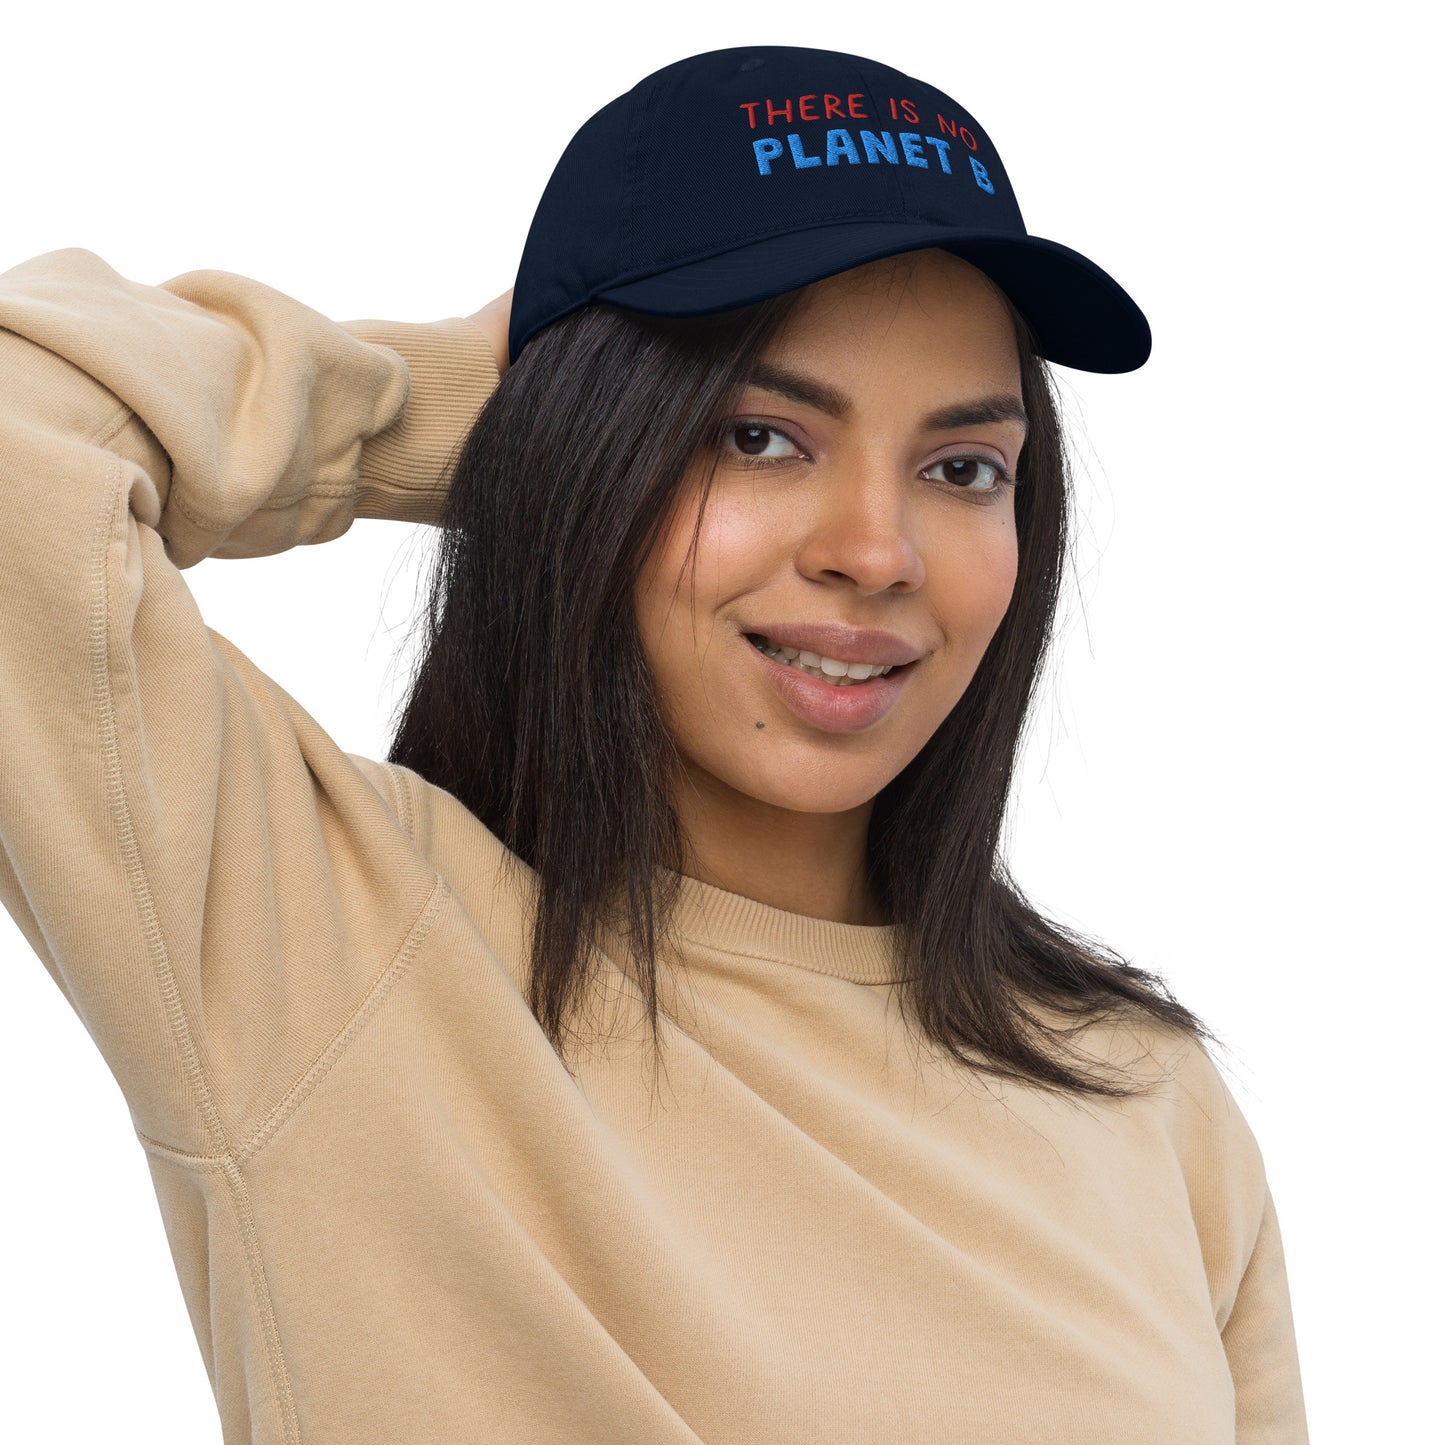 Organic Bliss: Premium Eco-Friendly Dad Hat for the Conscious Fashion Enthusiast